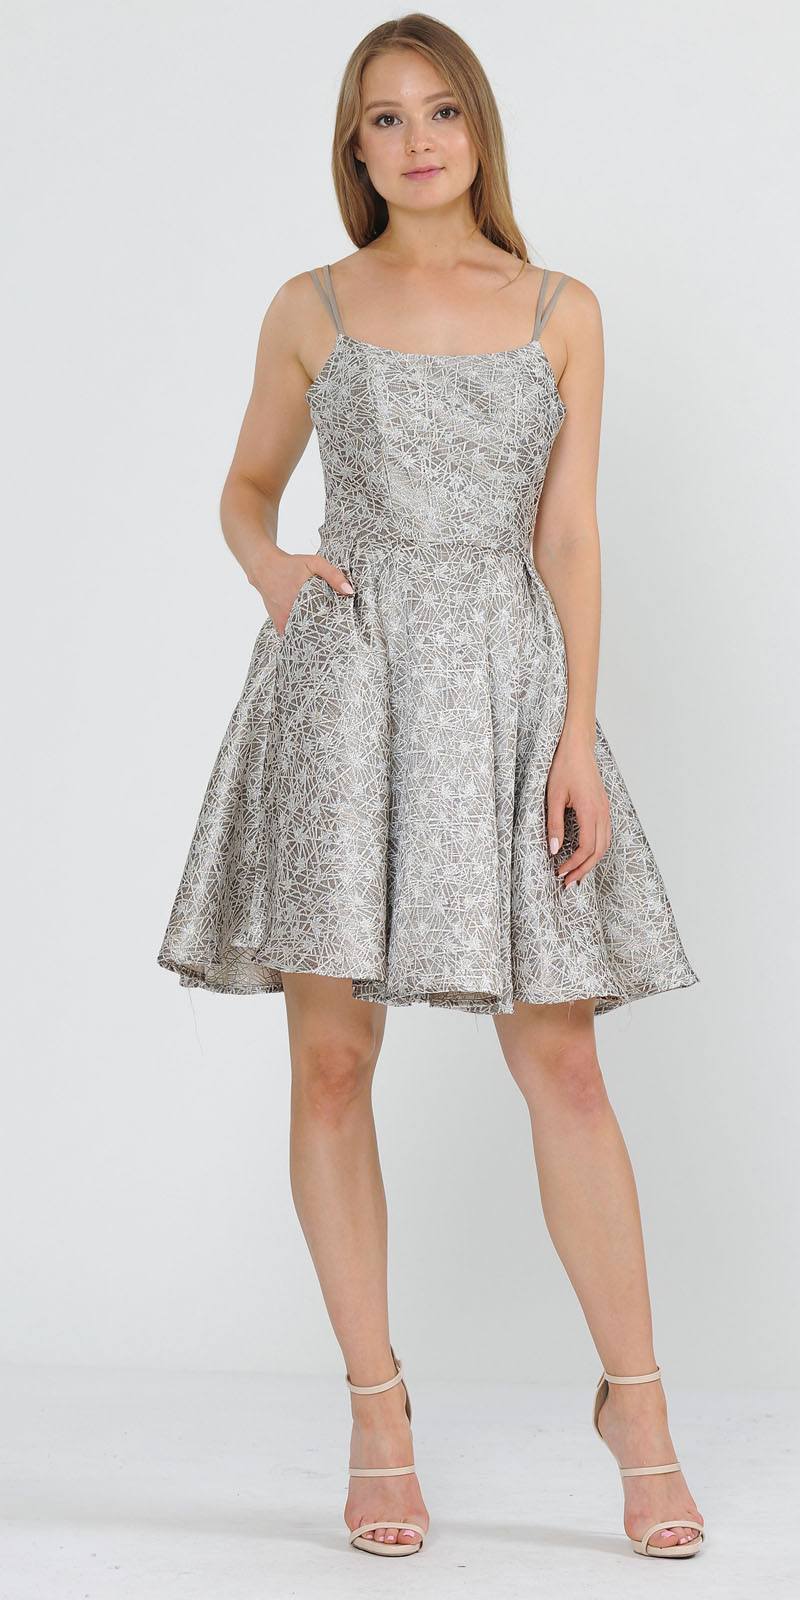 Cut-Out Back Homecoming Short Dress Champagne with Pockets